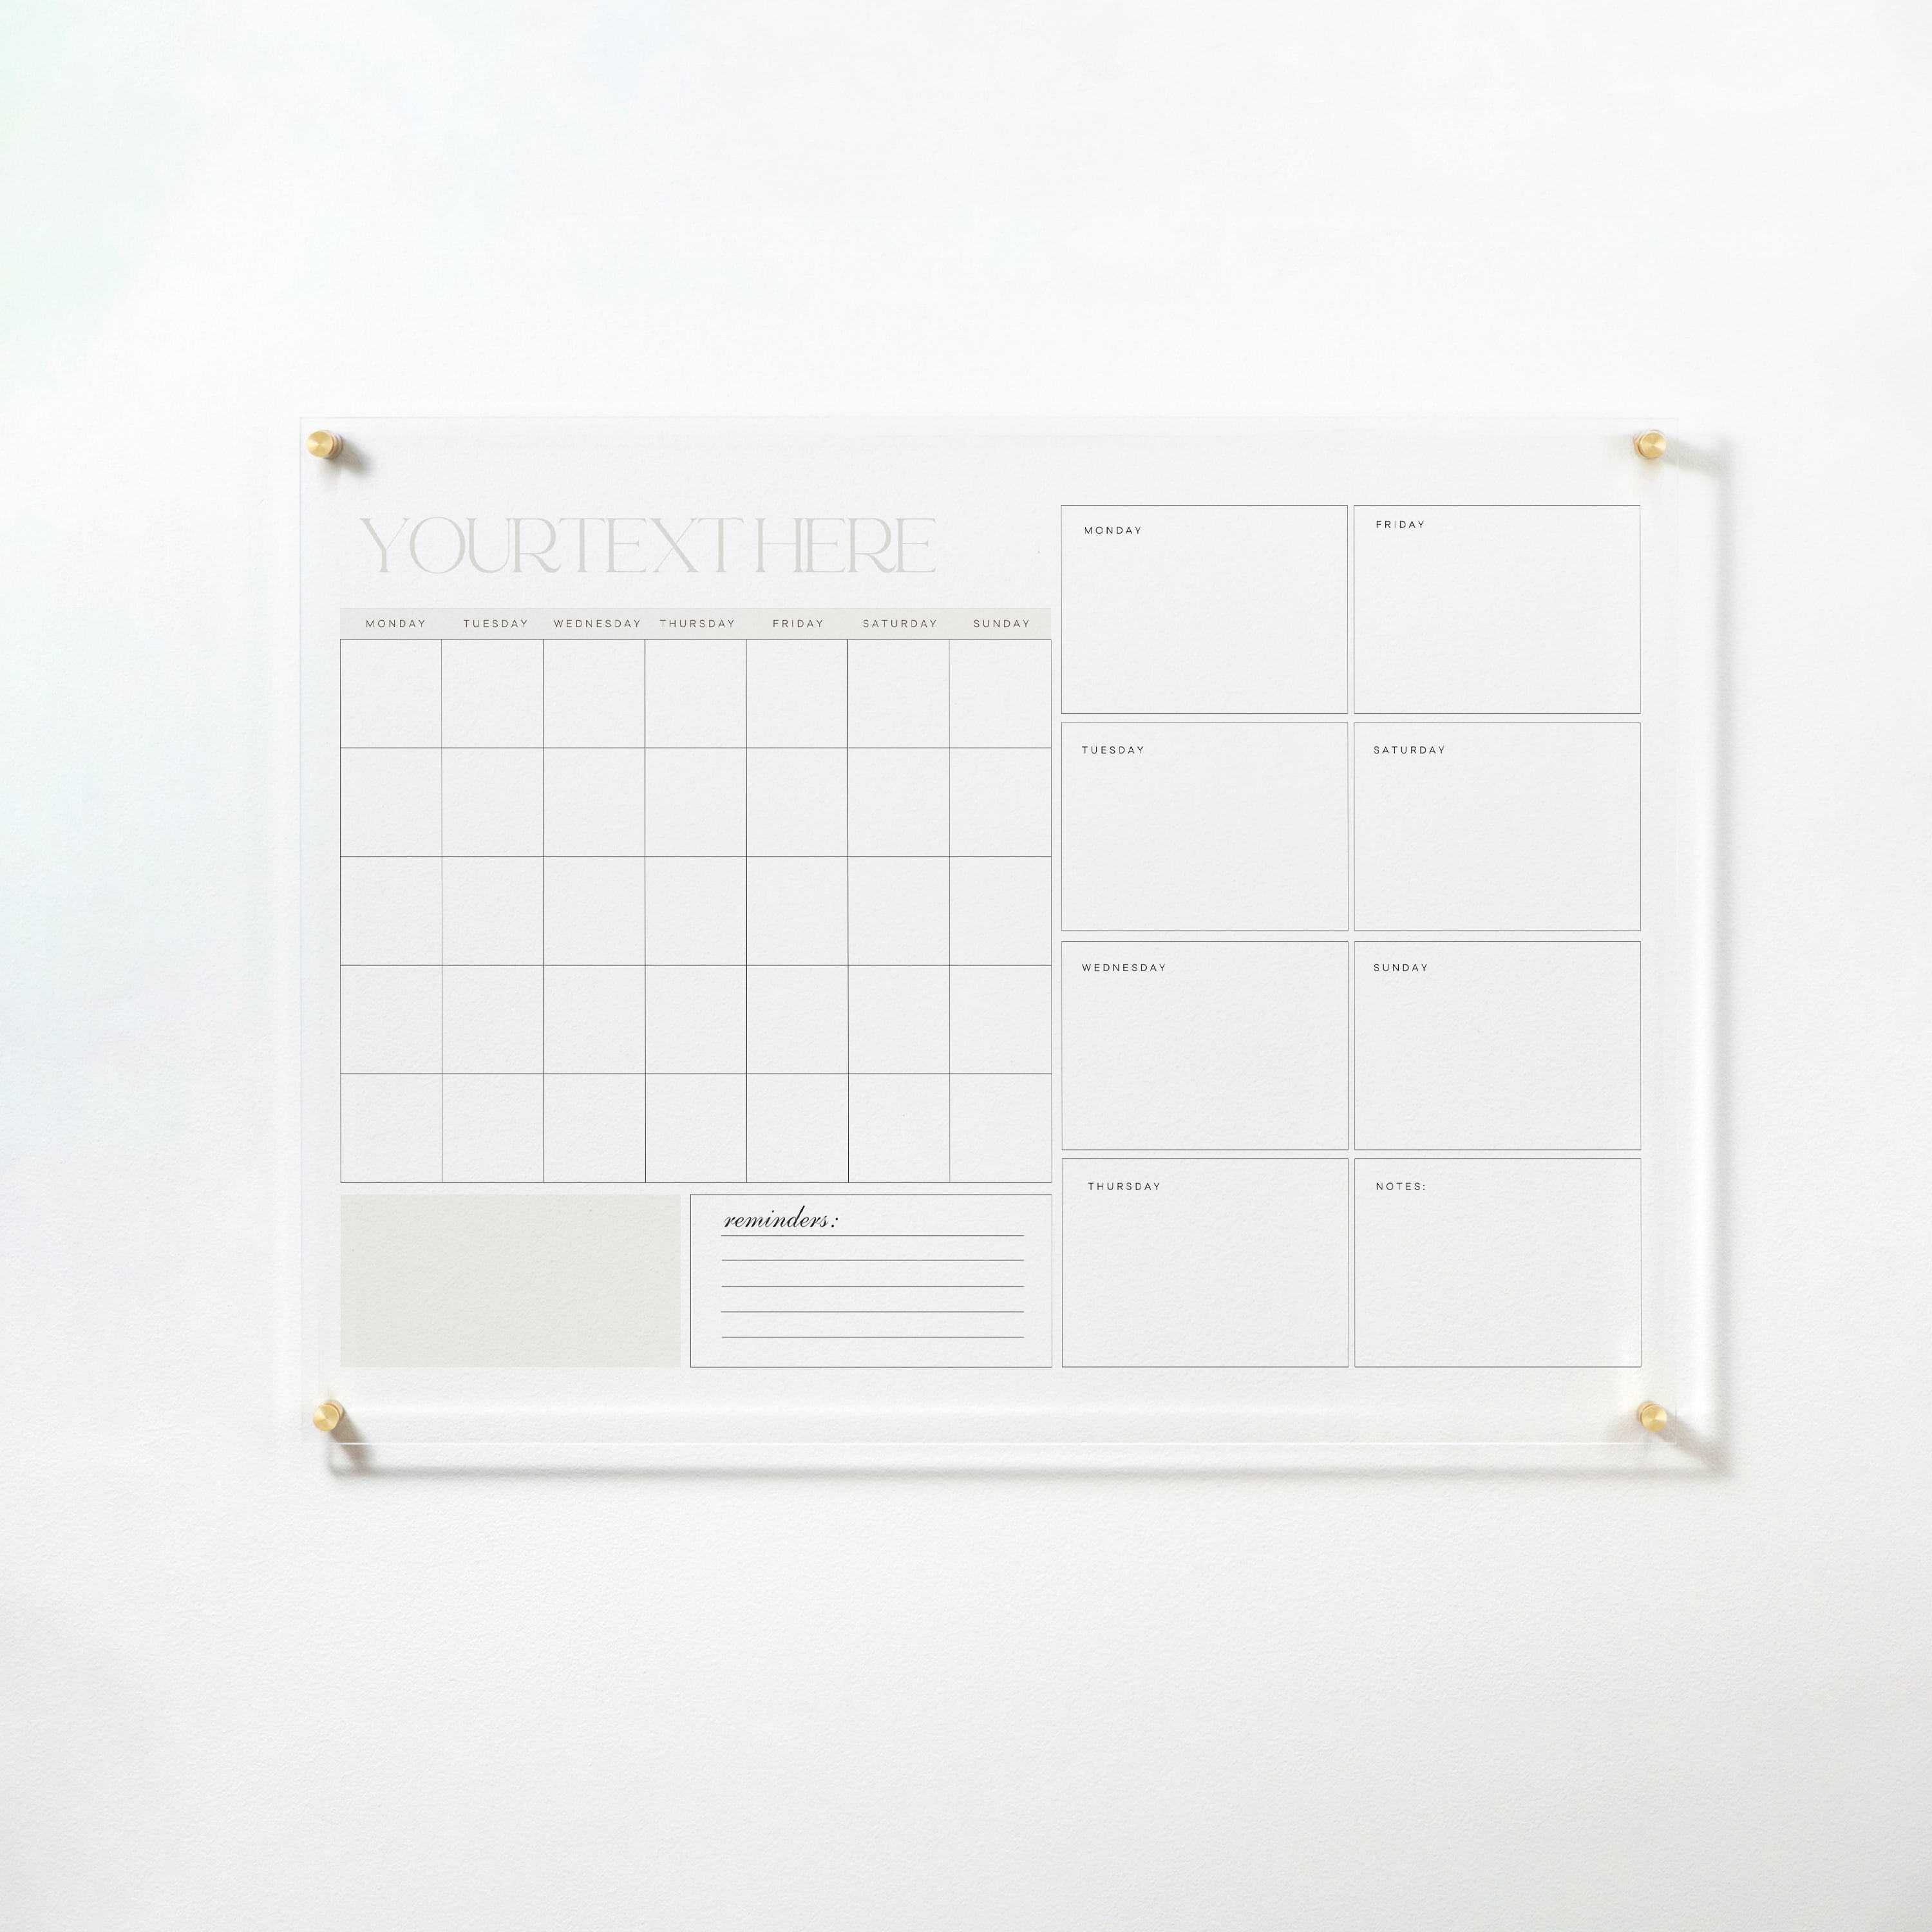 Full view of a dry erase calendar mounted on a white wall, showcasing a monthly grid and weekly boxes with space for reminders and notes.